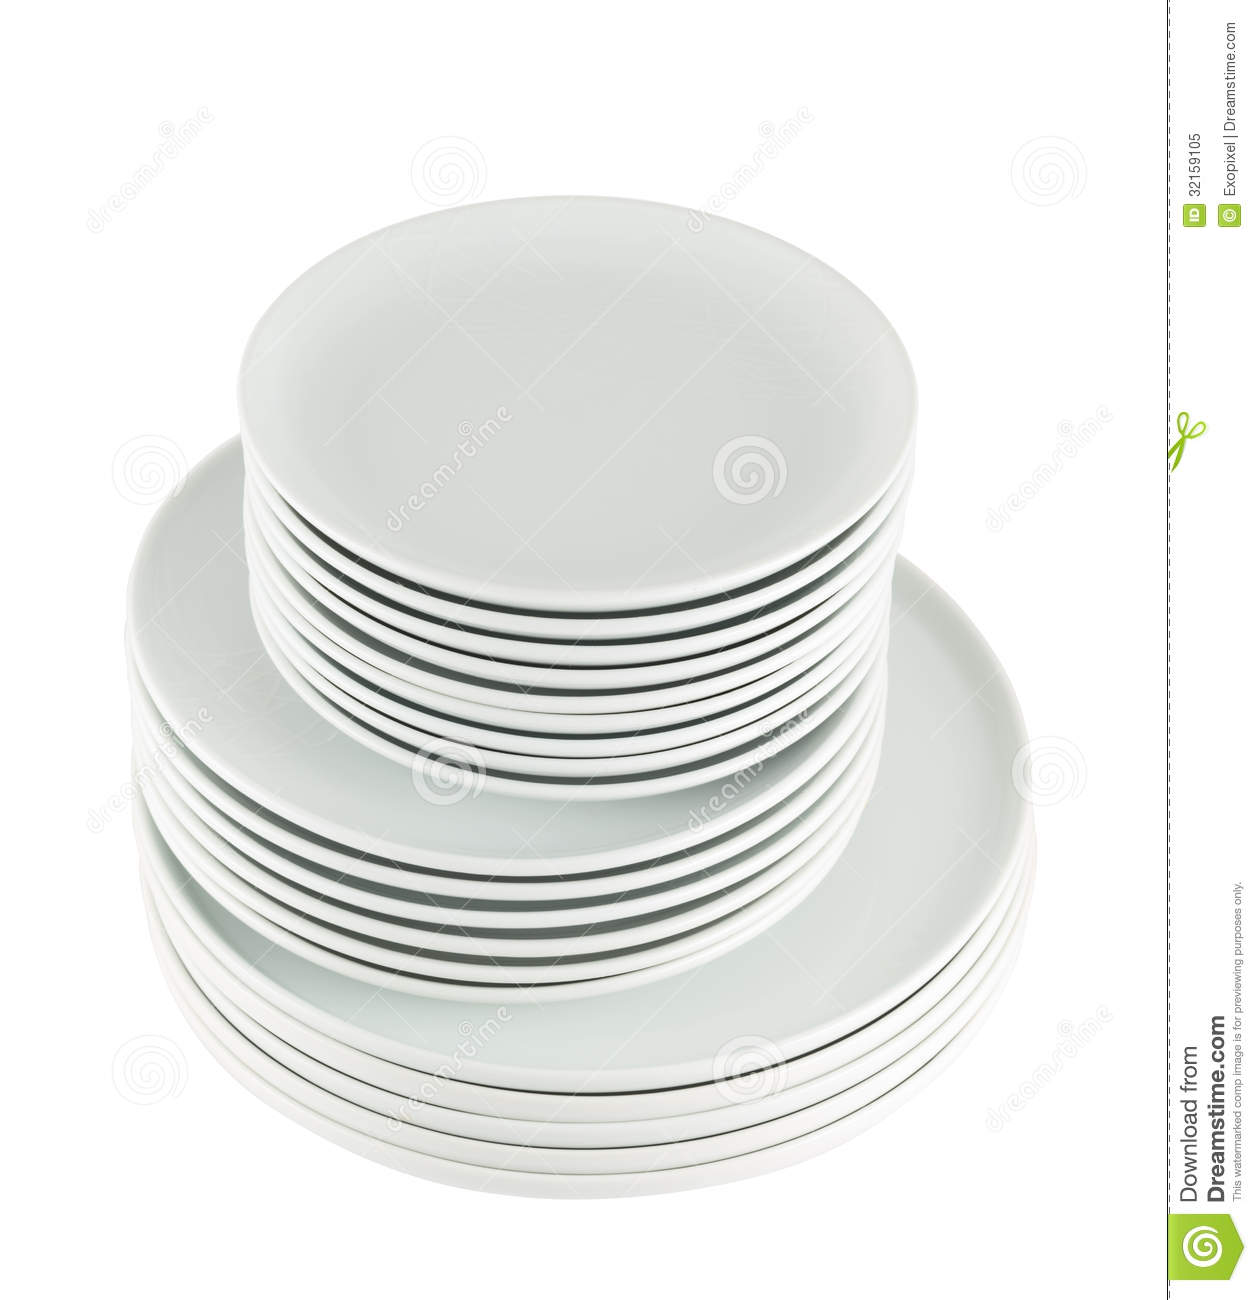 Plates Clipart  Plate Clipart  Stack Of Dirty Plates Clipart